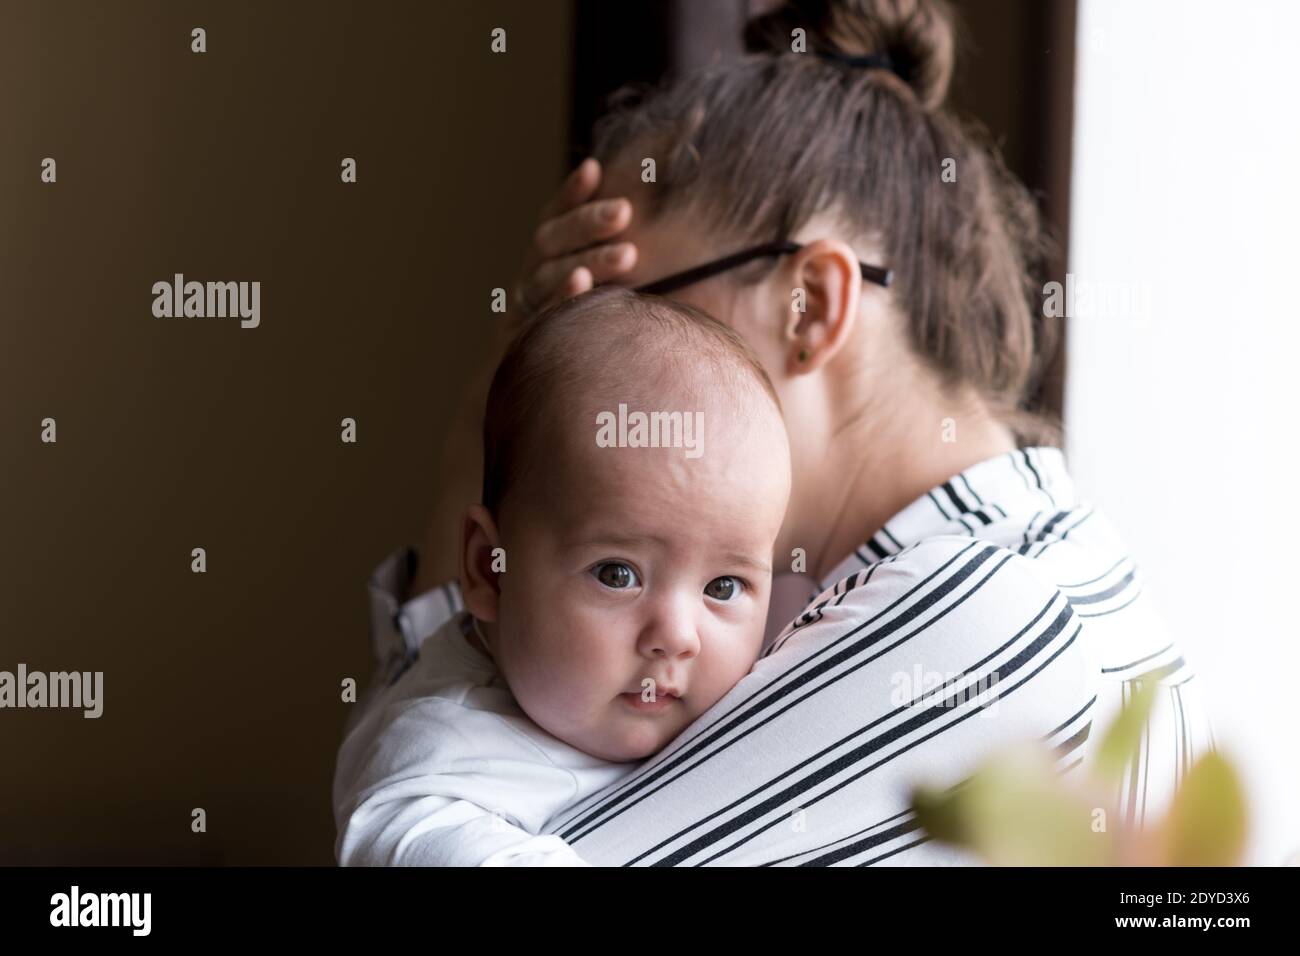 Childhood, motherhood, illness family concepts - upset, tired nervous business woman Lady mother with headache holding infant child newborn baby in Stock Photo